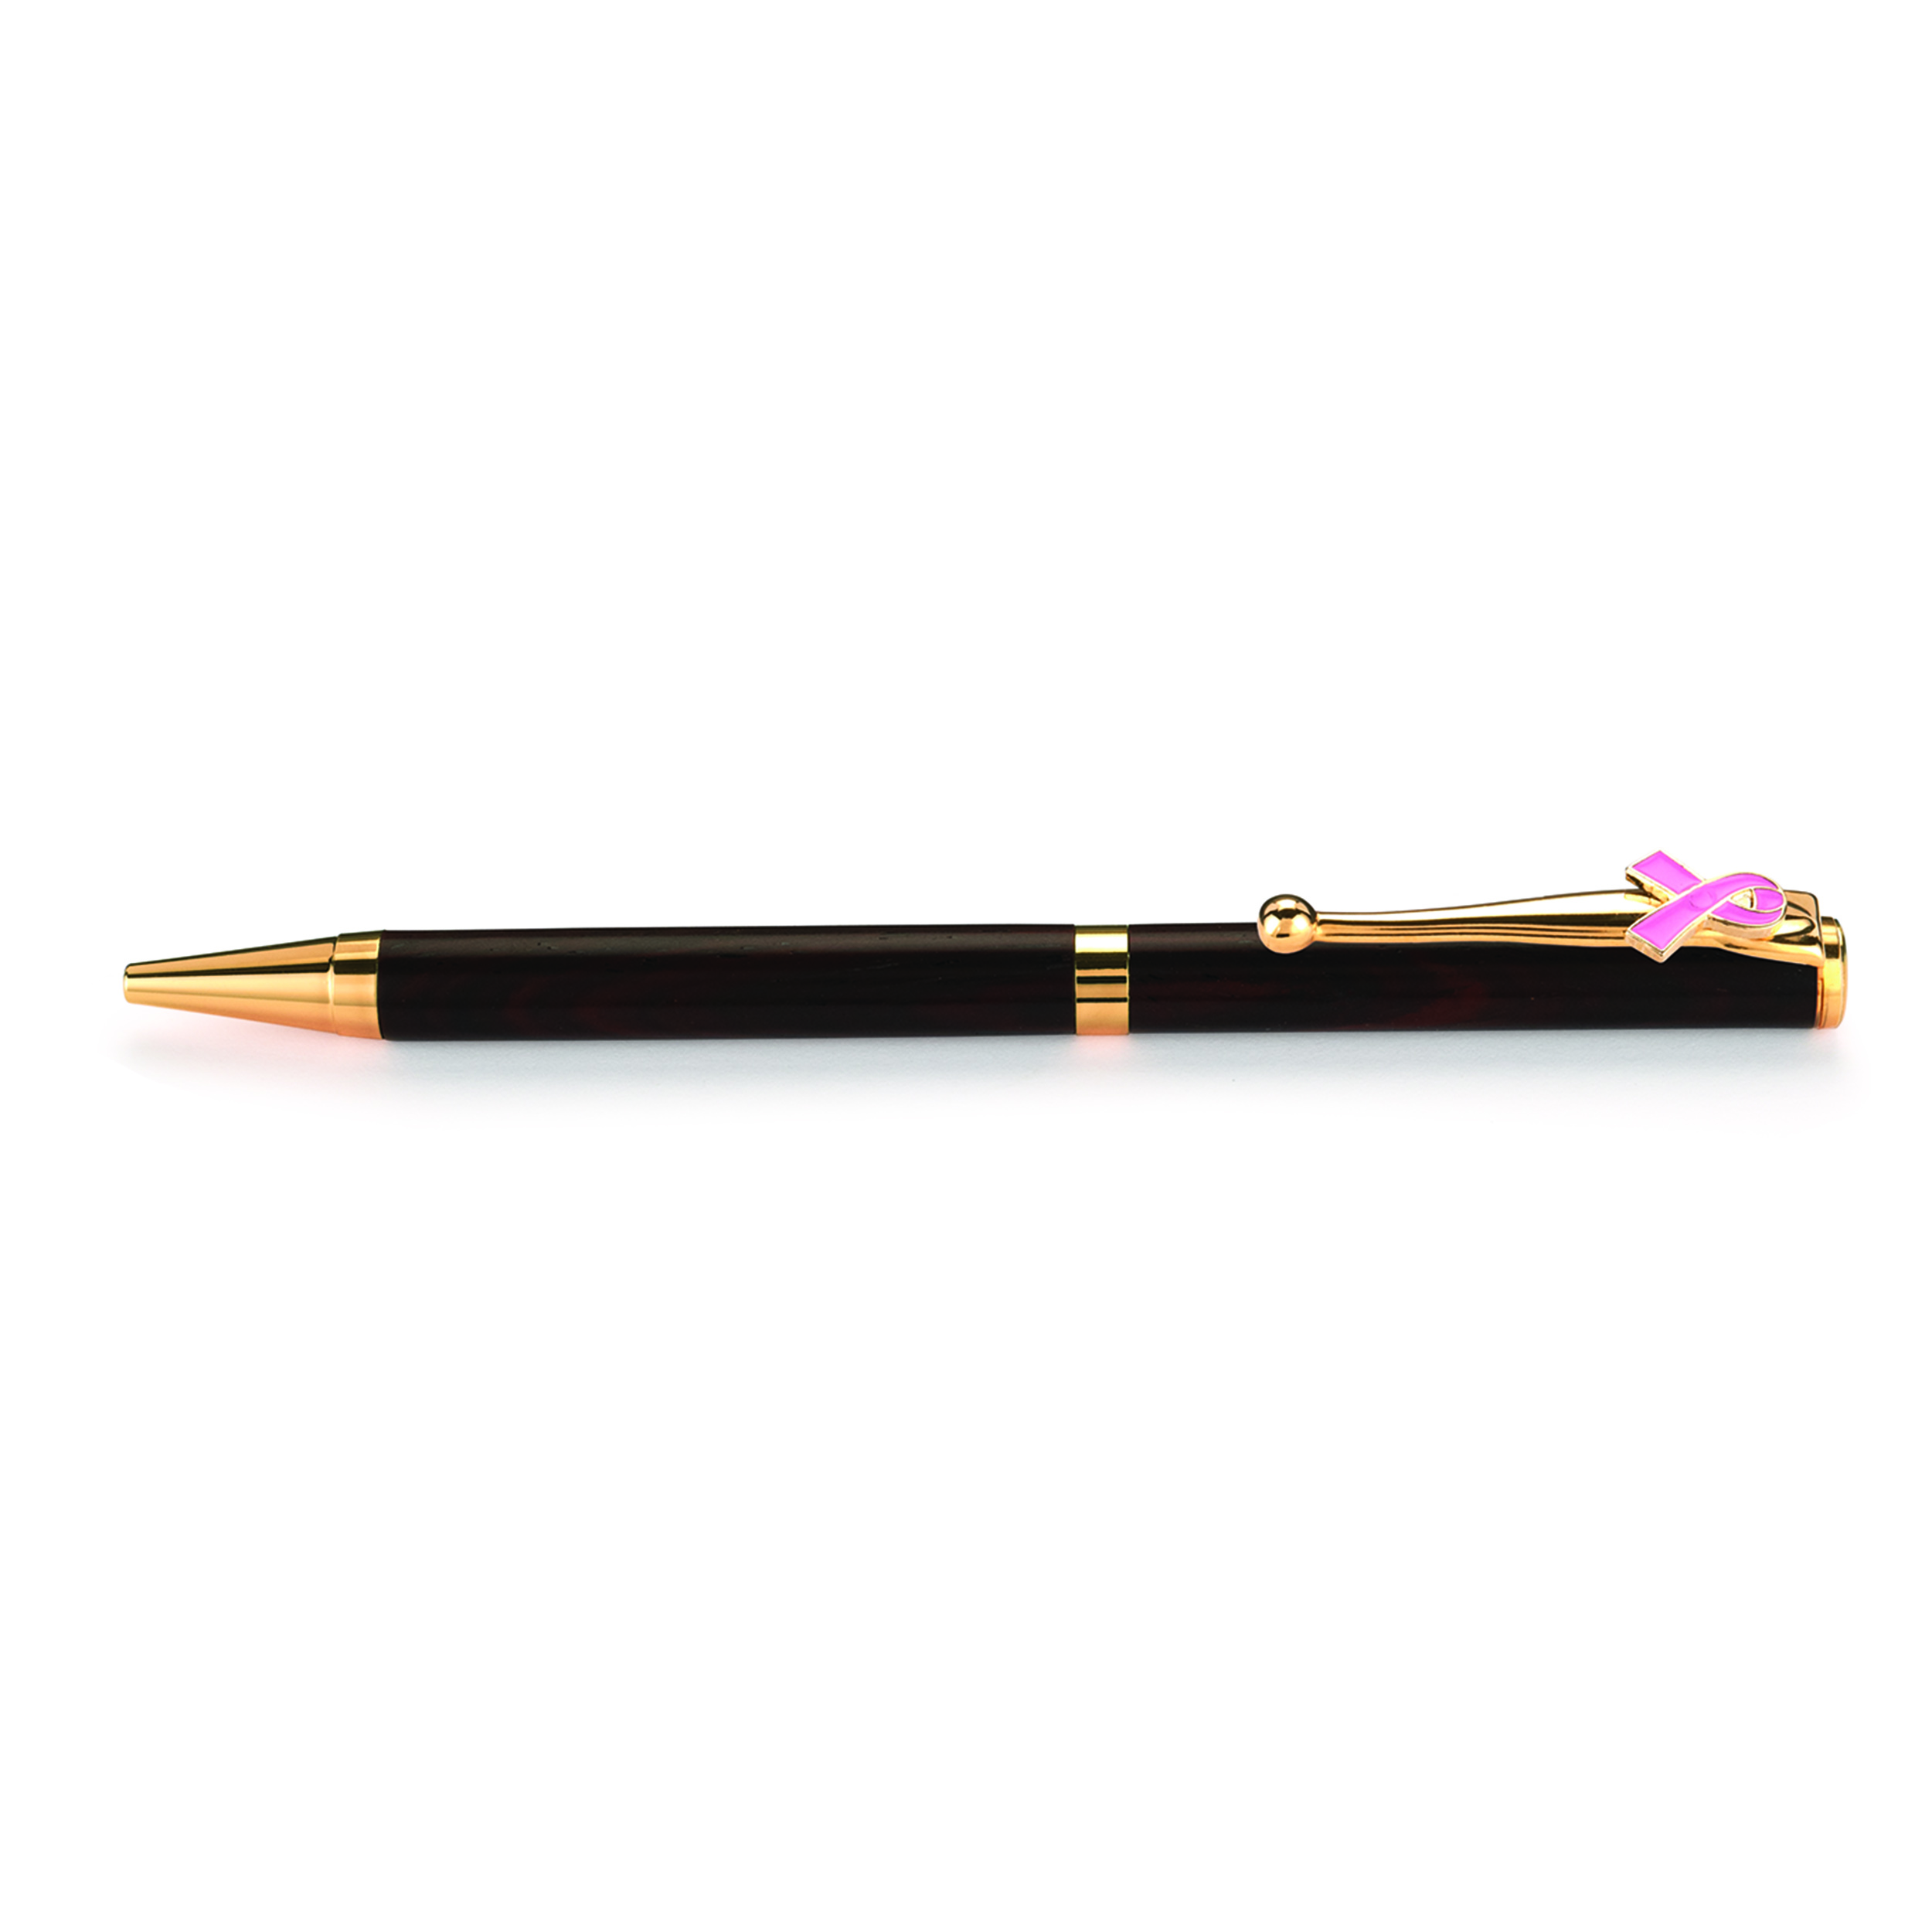 7mm Slim Style Breast Cancer Awareness Pen Kit - Woodcraft Gold